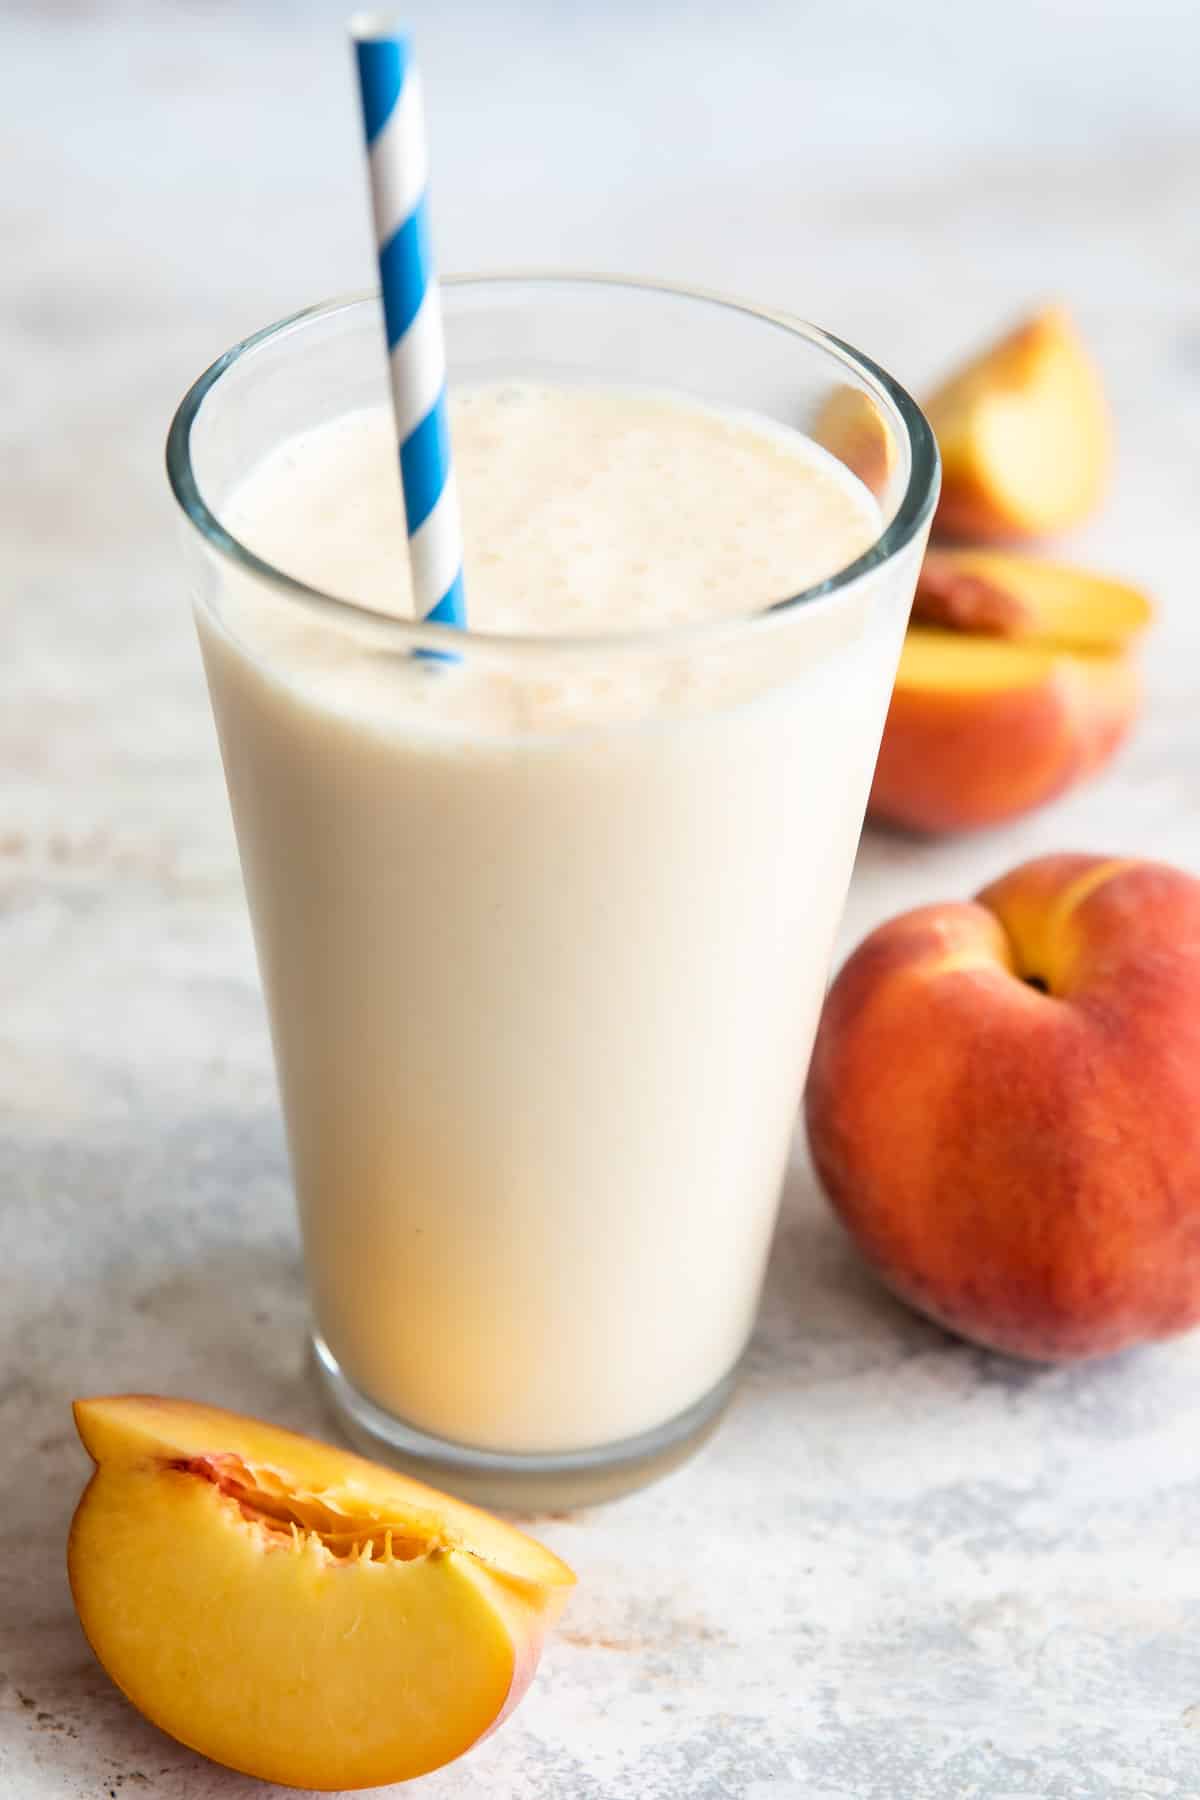 A glass of peach smoothie next to fresh peaches on a counter.